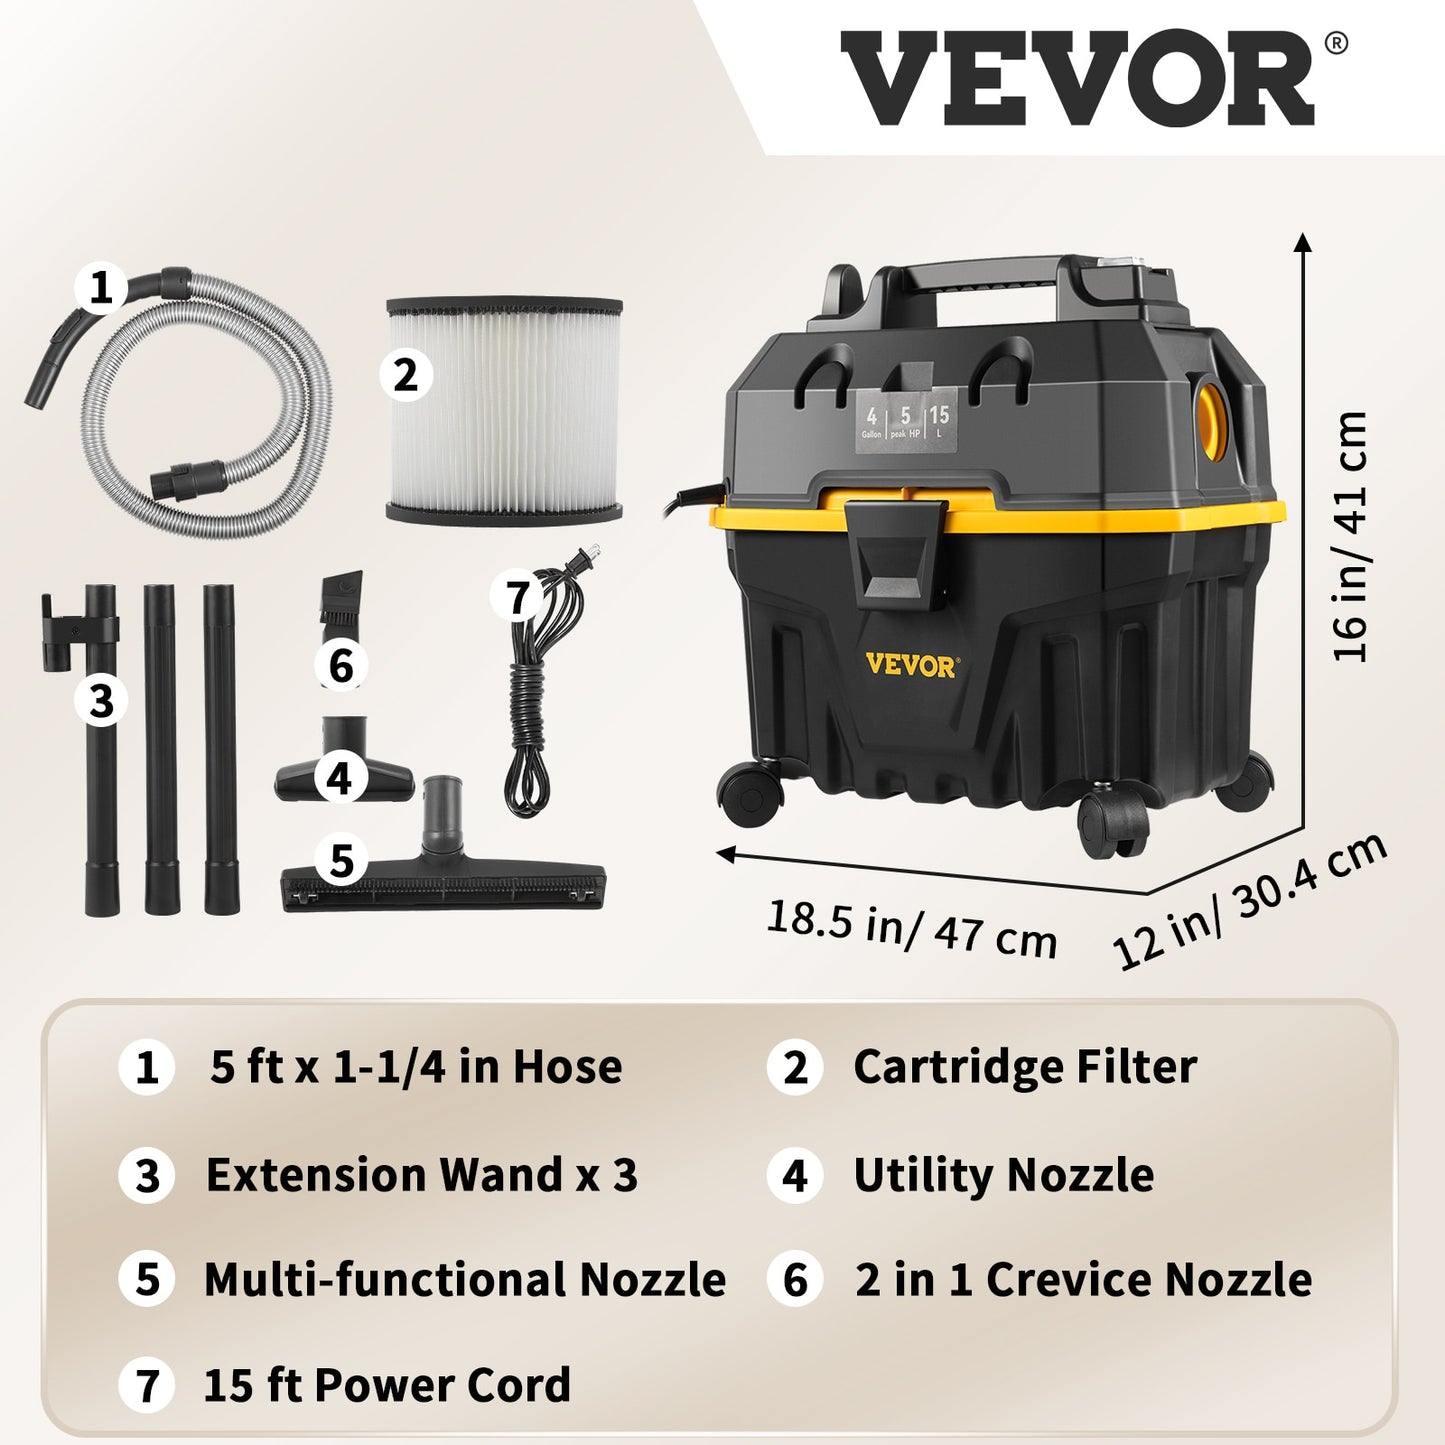 VEVOR Portable Wet and Dry Vacuum Cleaner 15L For Car &amp; Home Appliance 1200W Power Strong Suction Vacuum Cleaner &amp; Air Blower